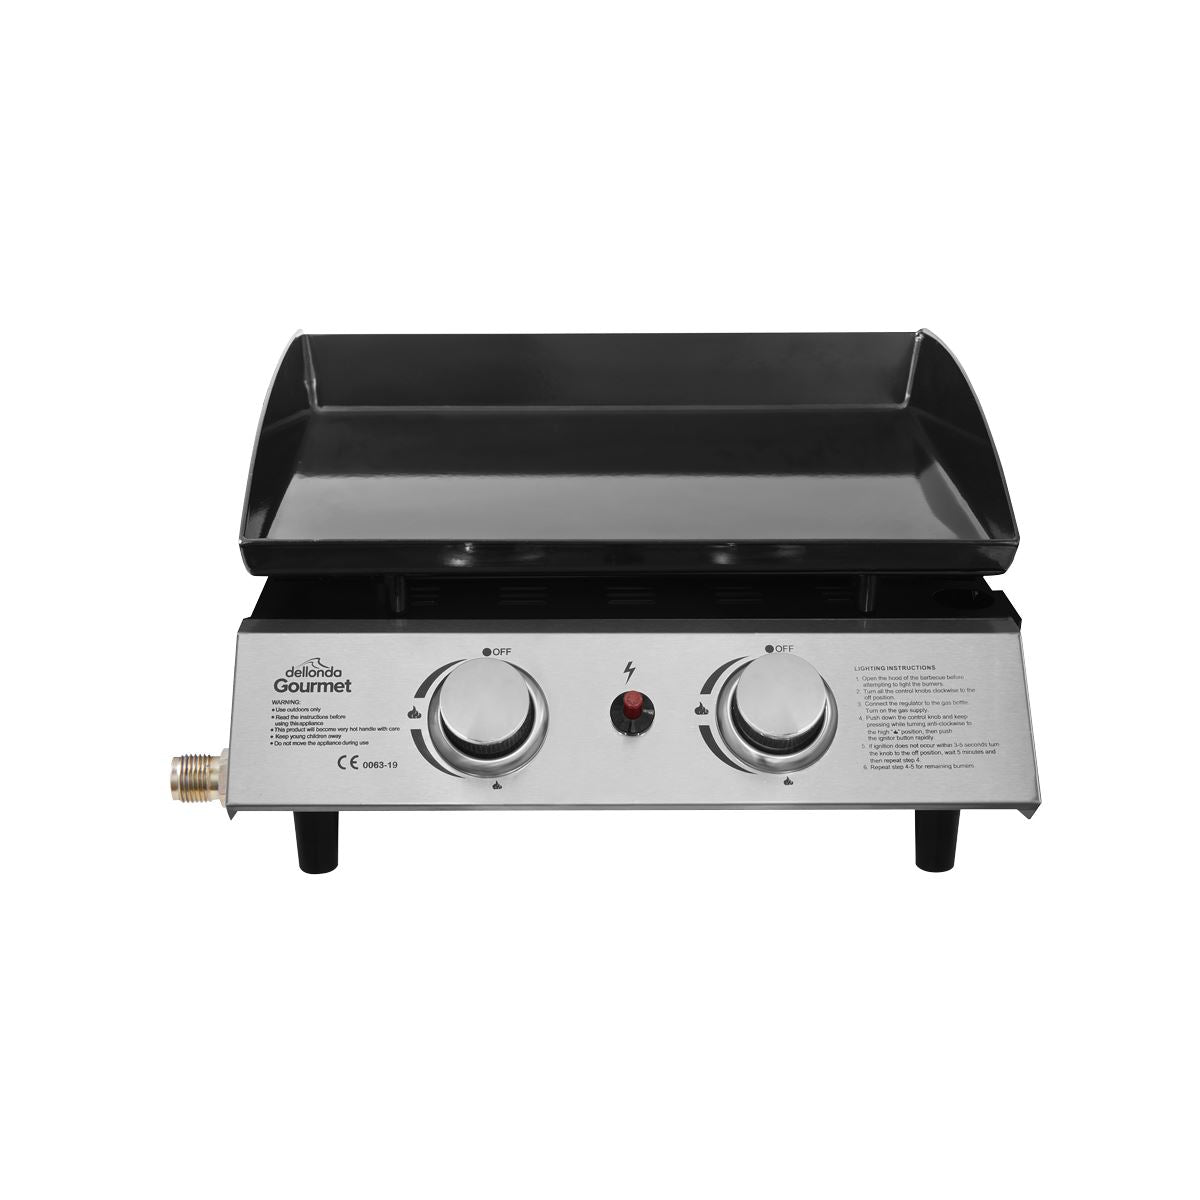 Dellonda 2 Burner Portable Gas Plancha 5kW BBQ Griddle, Stainless Steel